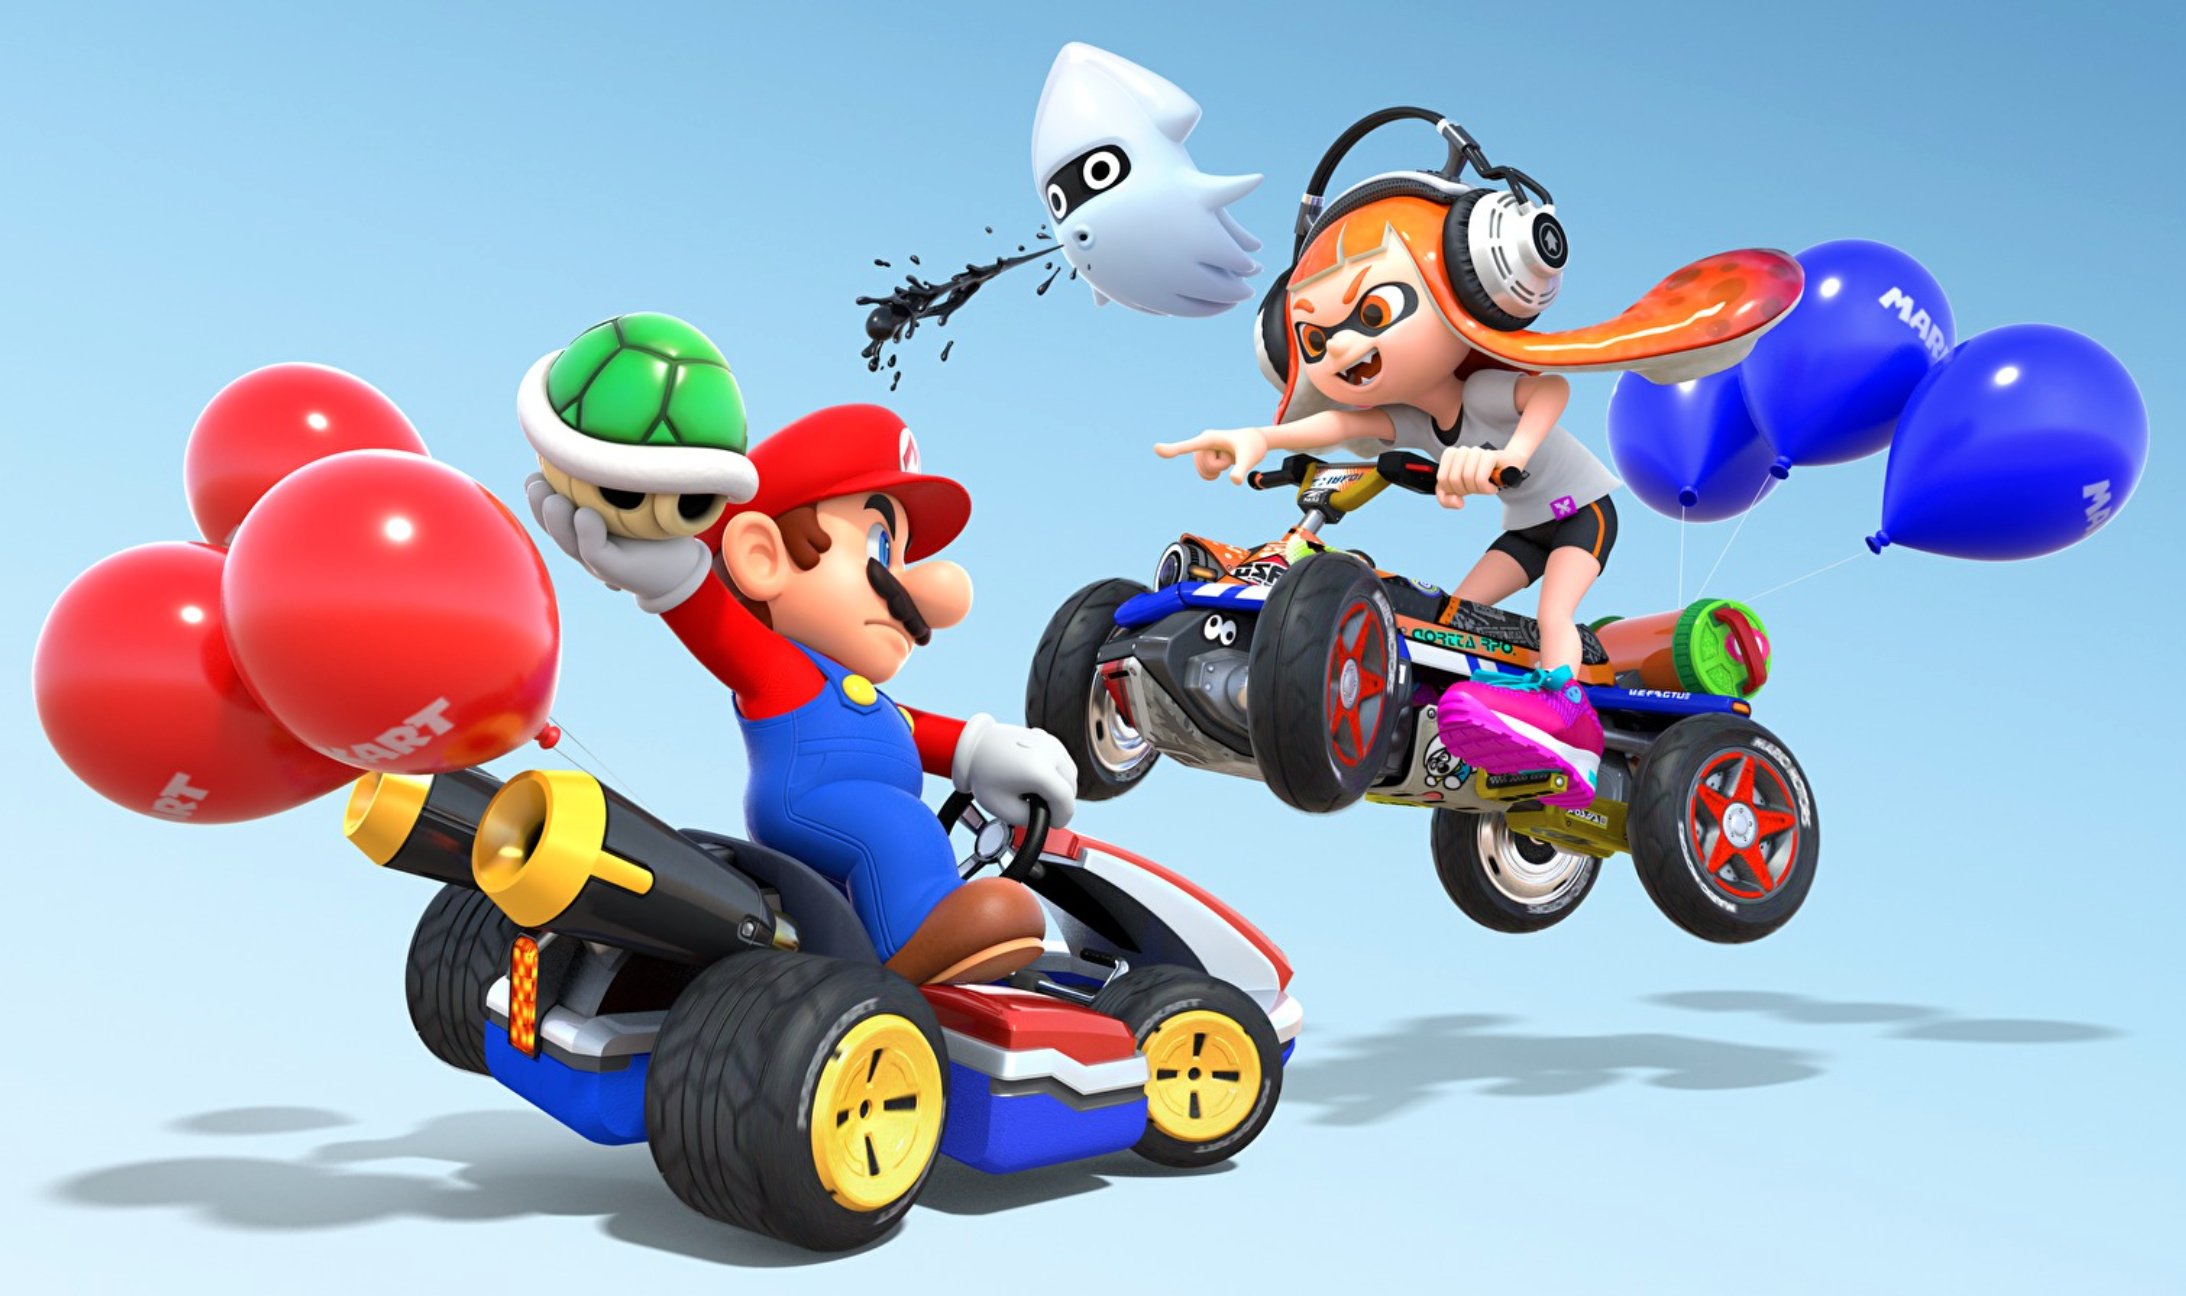 is mario kart 8 pc for real?